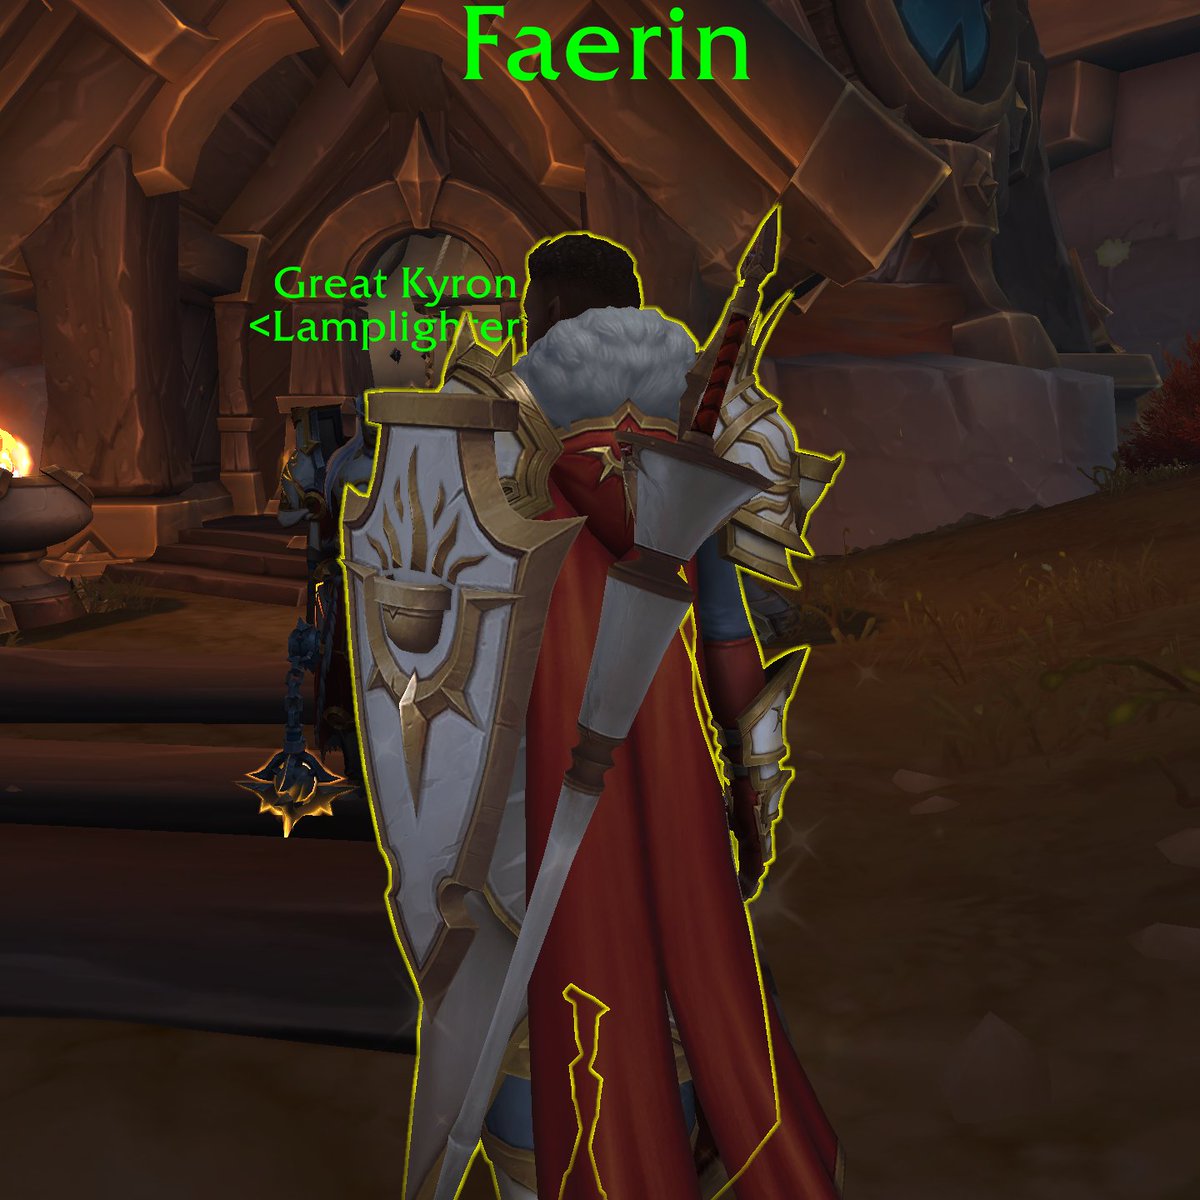 Guys.

Faerin's weapon though